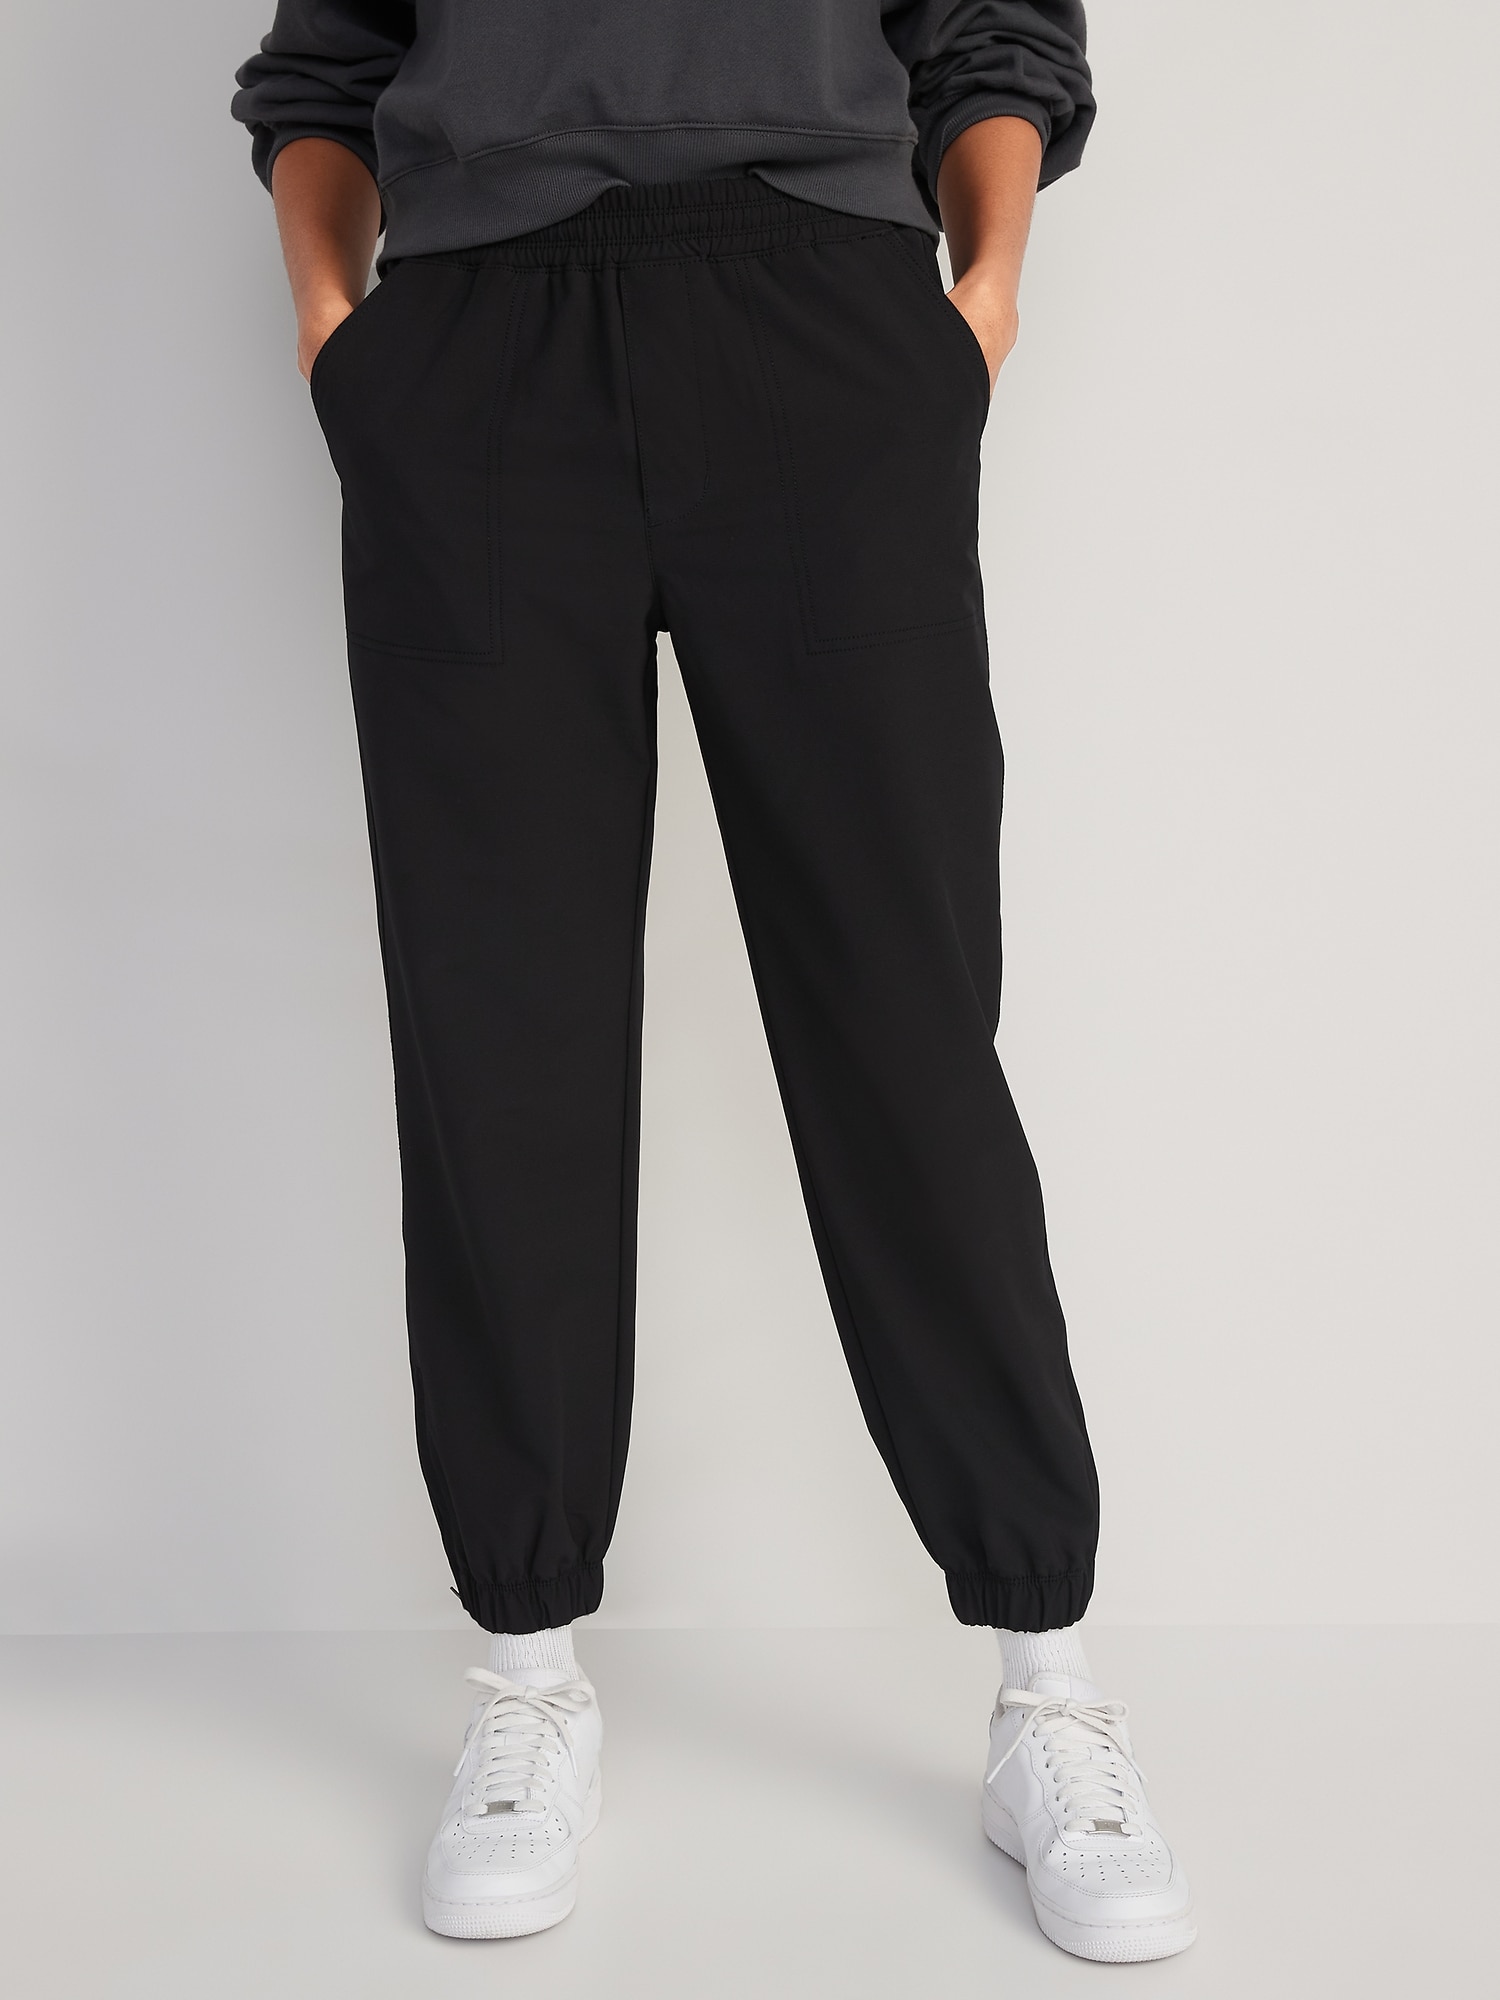 Old Navy High-Waisted All-Seasons StretchTech Water-Repellent Jogger Pants for Women black. 1